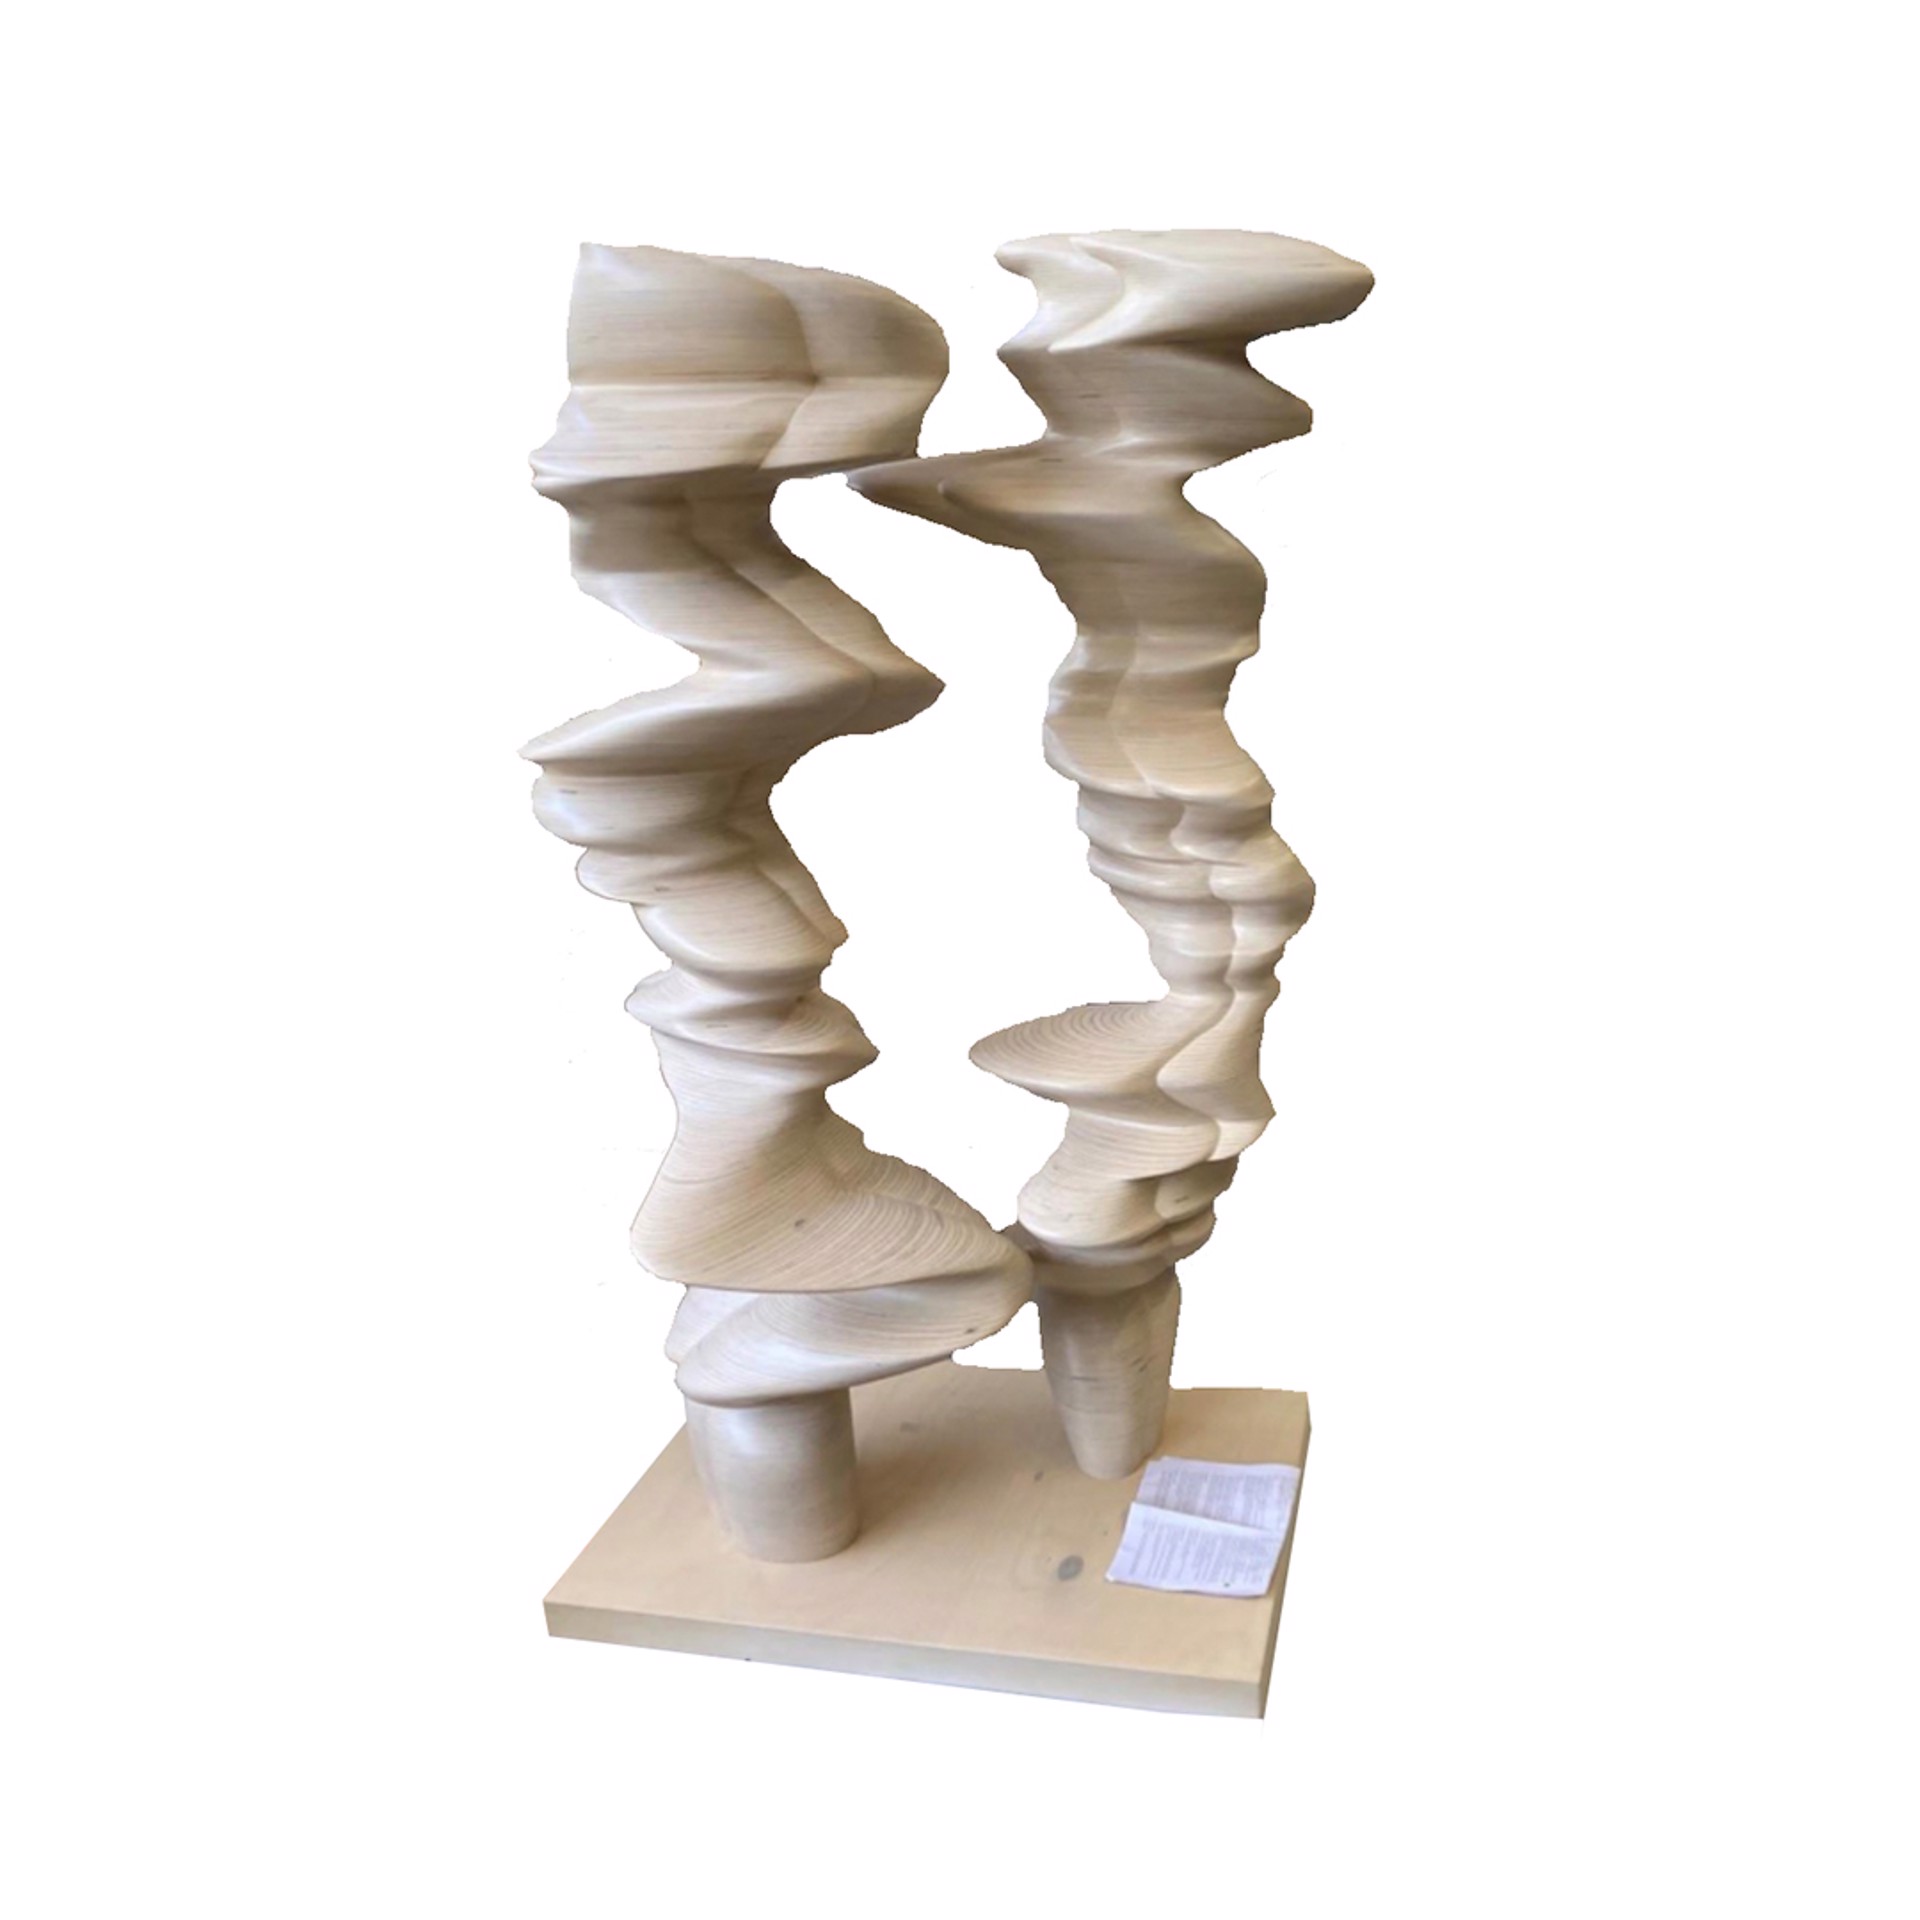 Point of View by Tony Cragg